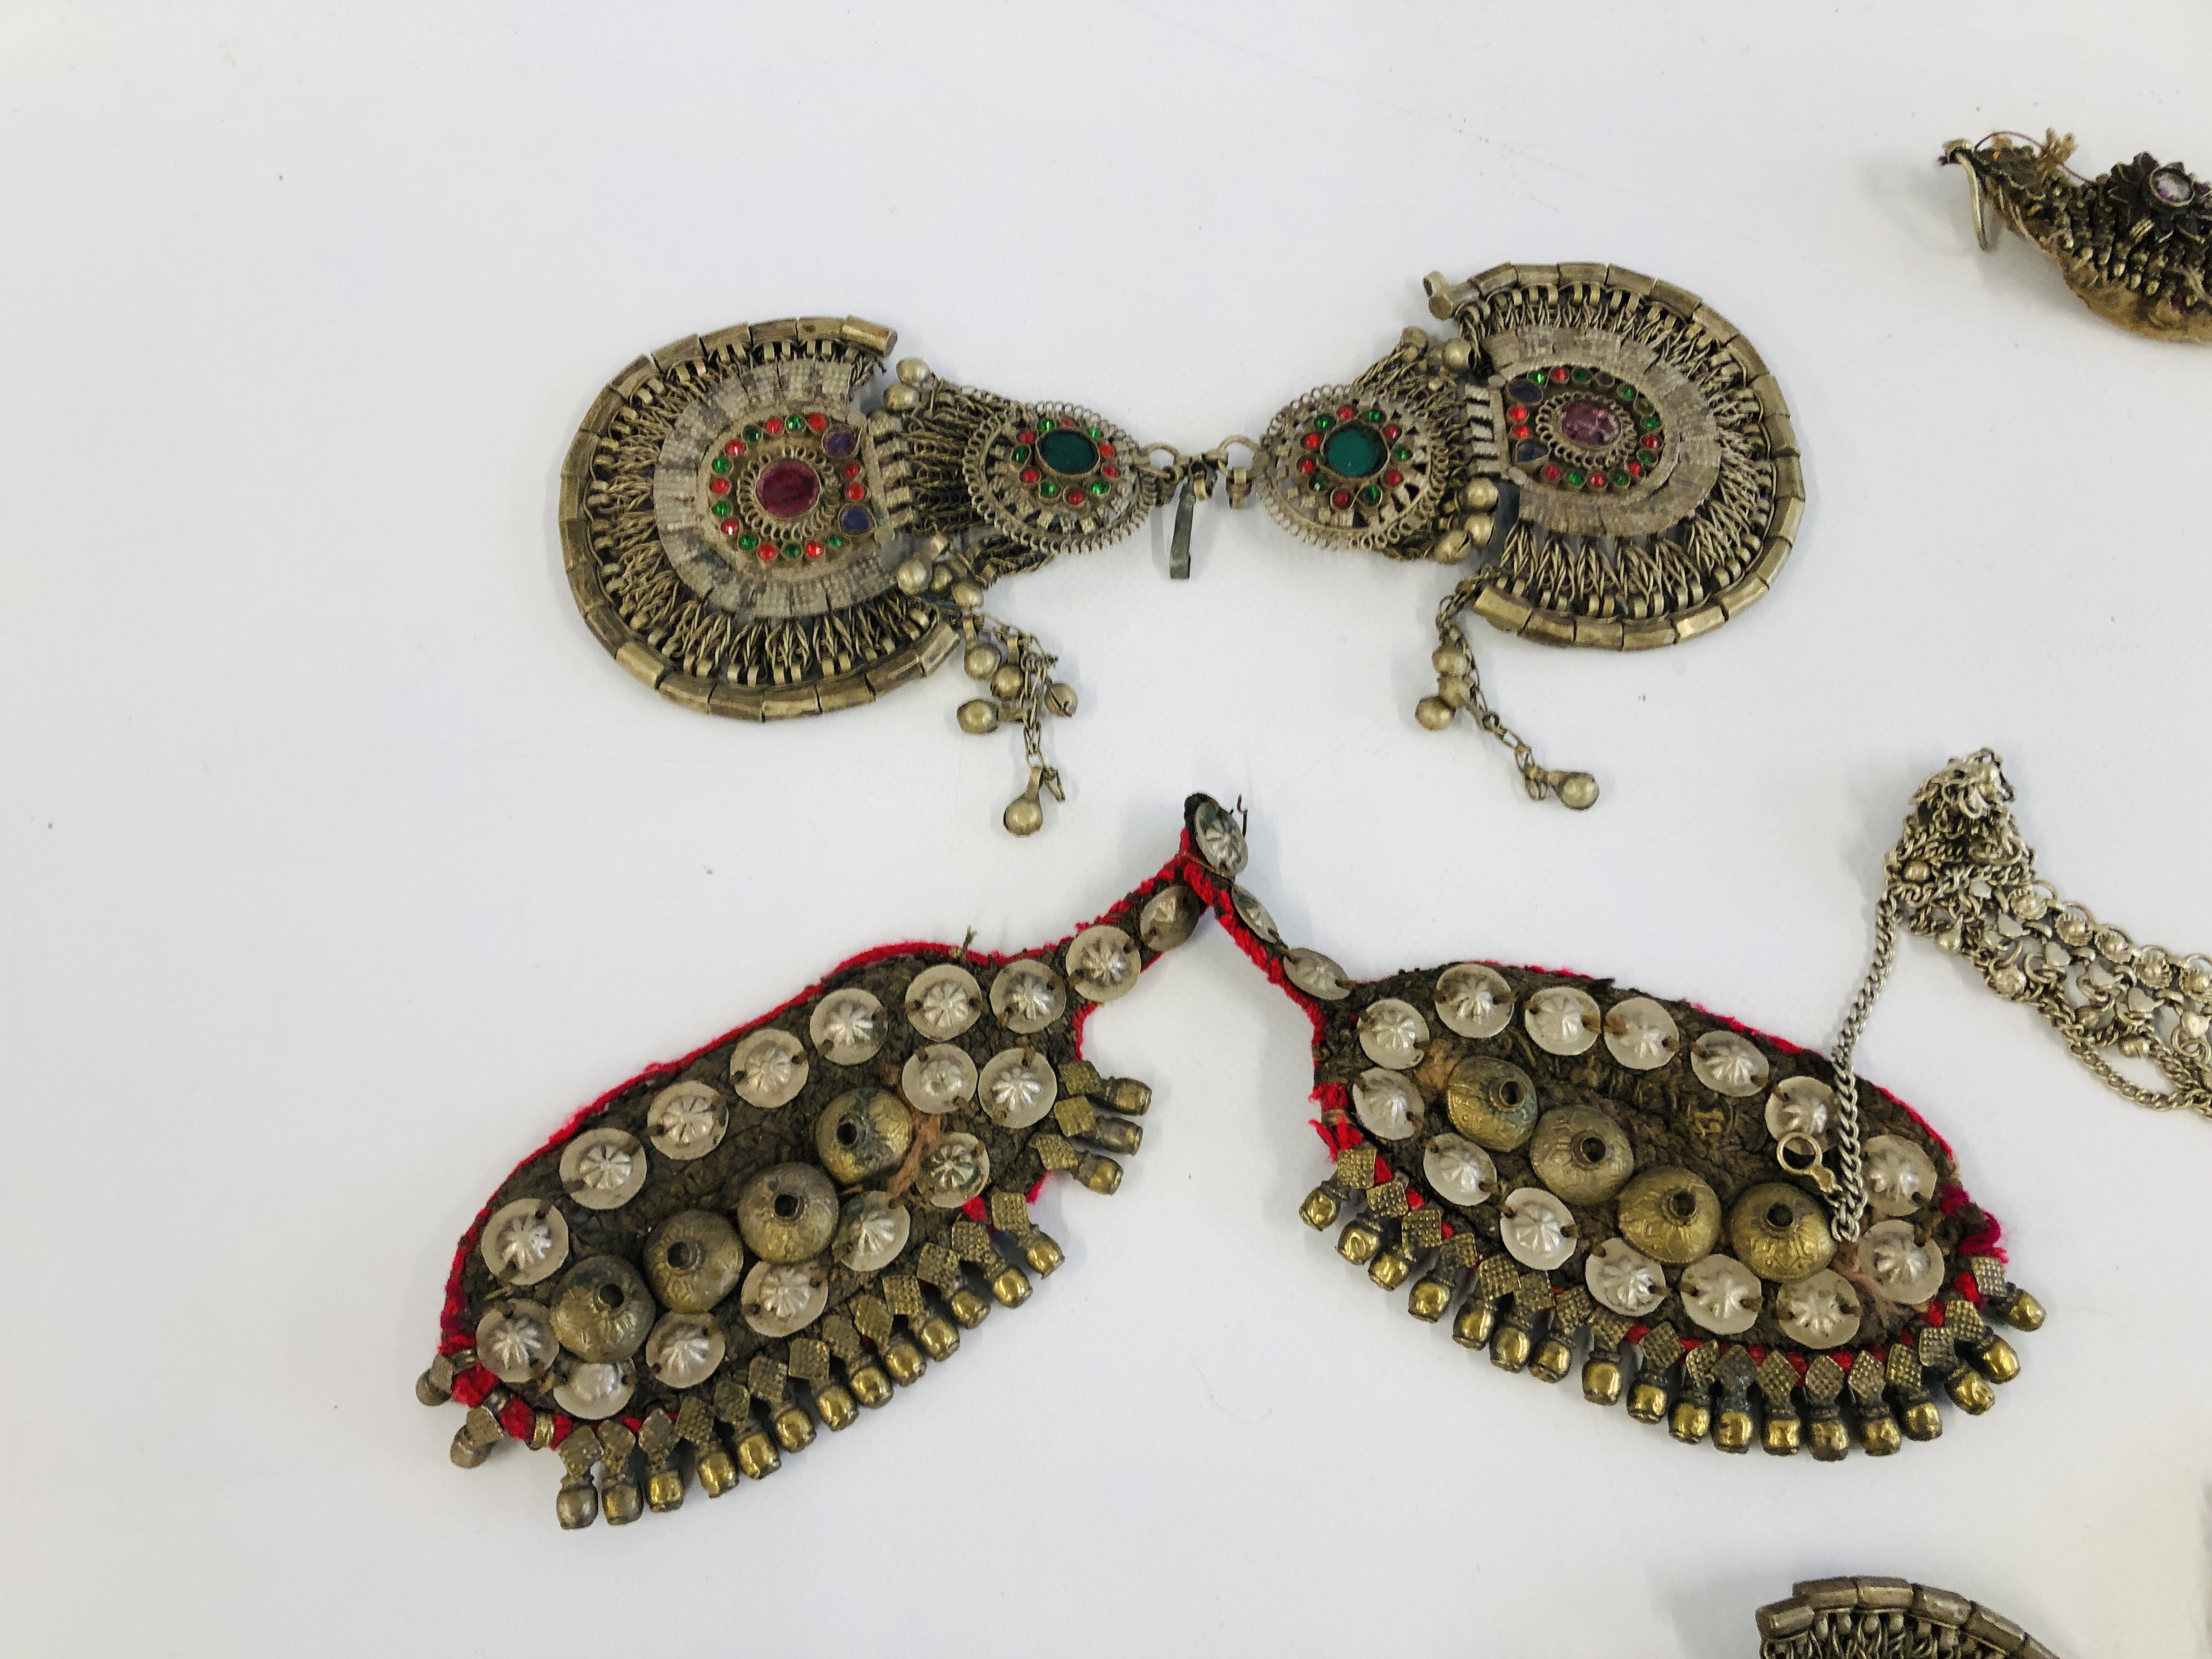 A GROUP OF EASTERN STYLE WHITE METAL JEWELED CLOTHING / GARMENT ACCESSORIES AND ANKLETS ETC. - Image 8 of 8